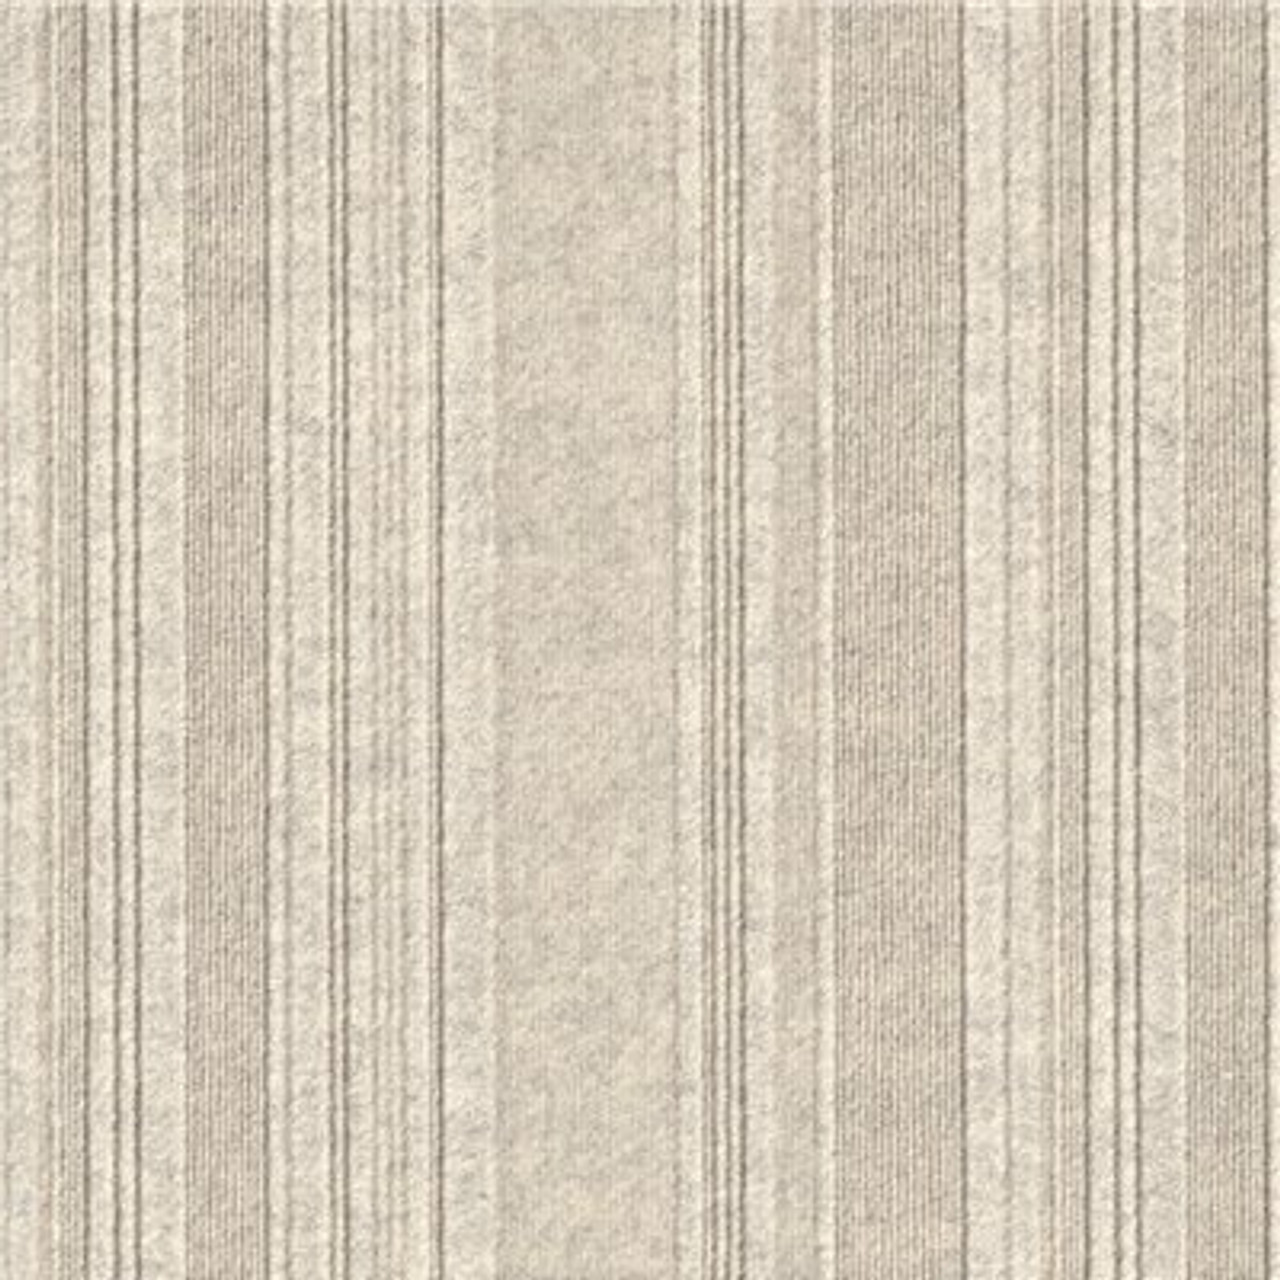 Foss Peel And Stick First Impressions Barcode Rib Oatmeal 24 In. X 24 In. Commercial Carpet Tile (15 Tiles/Case)